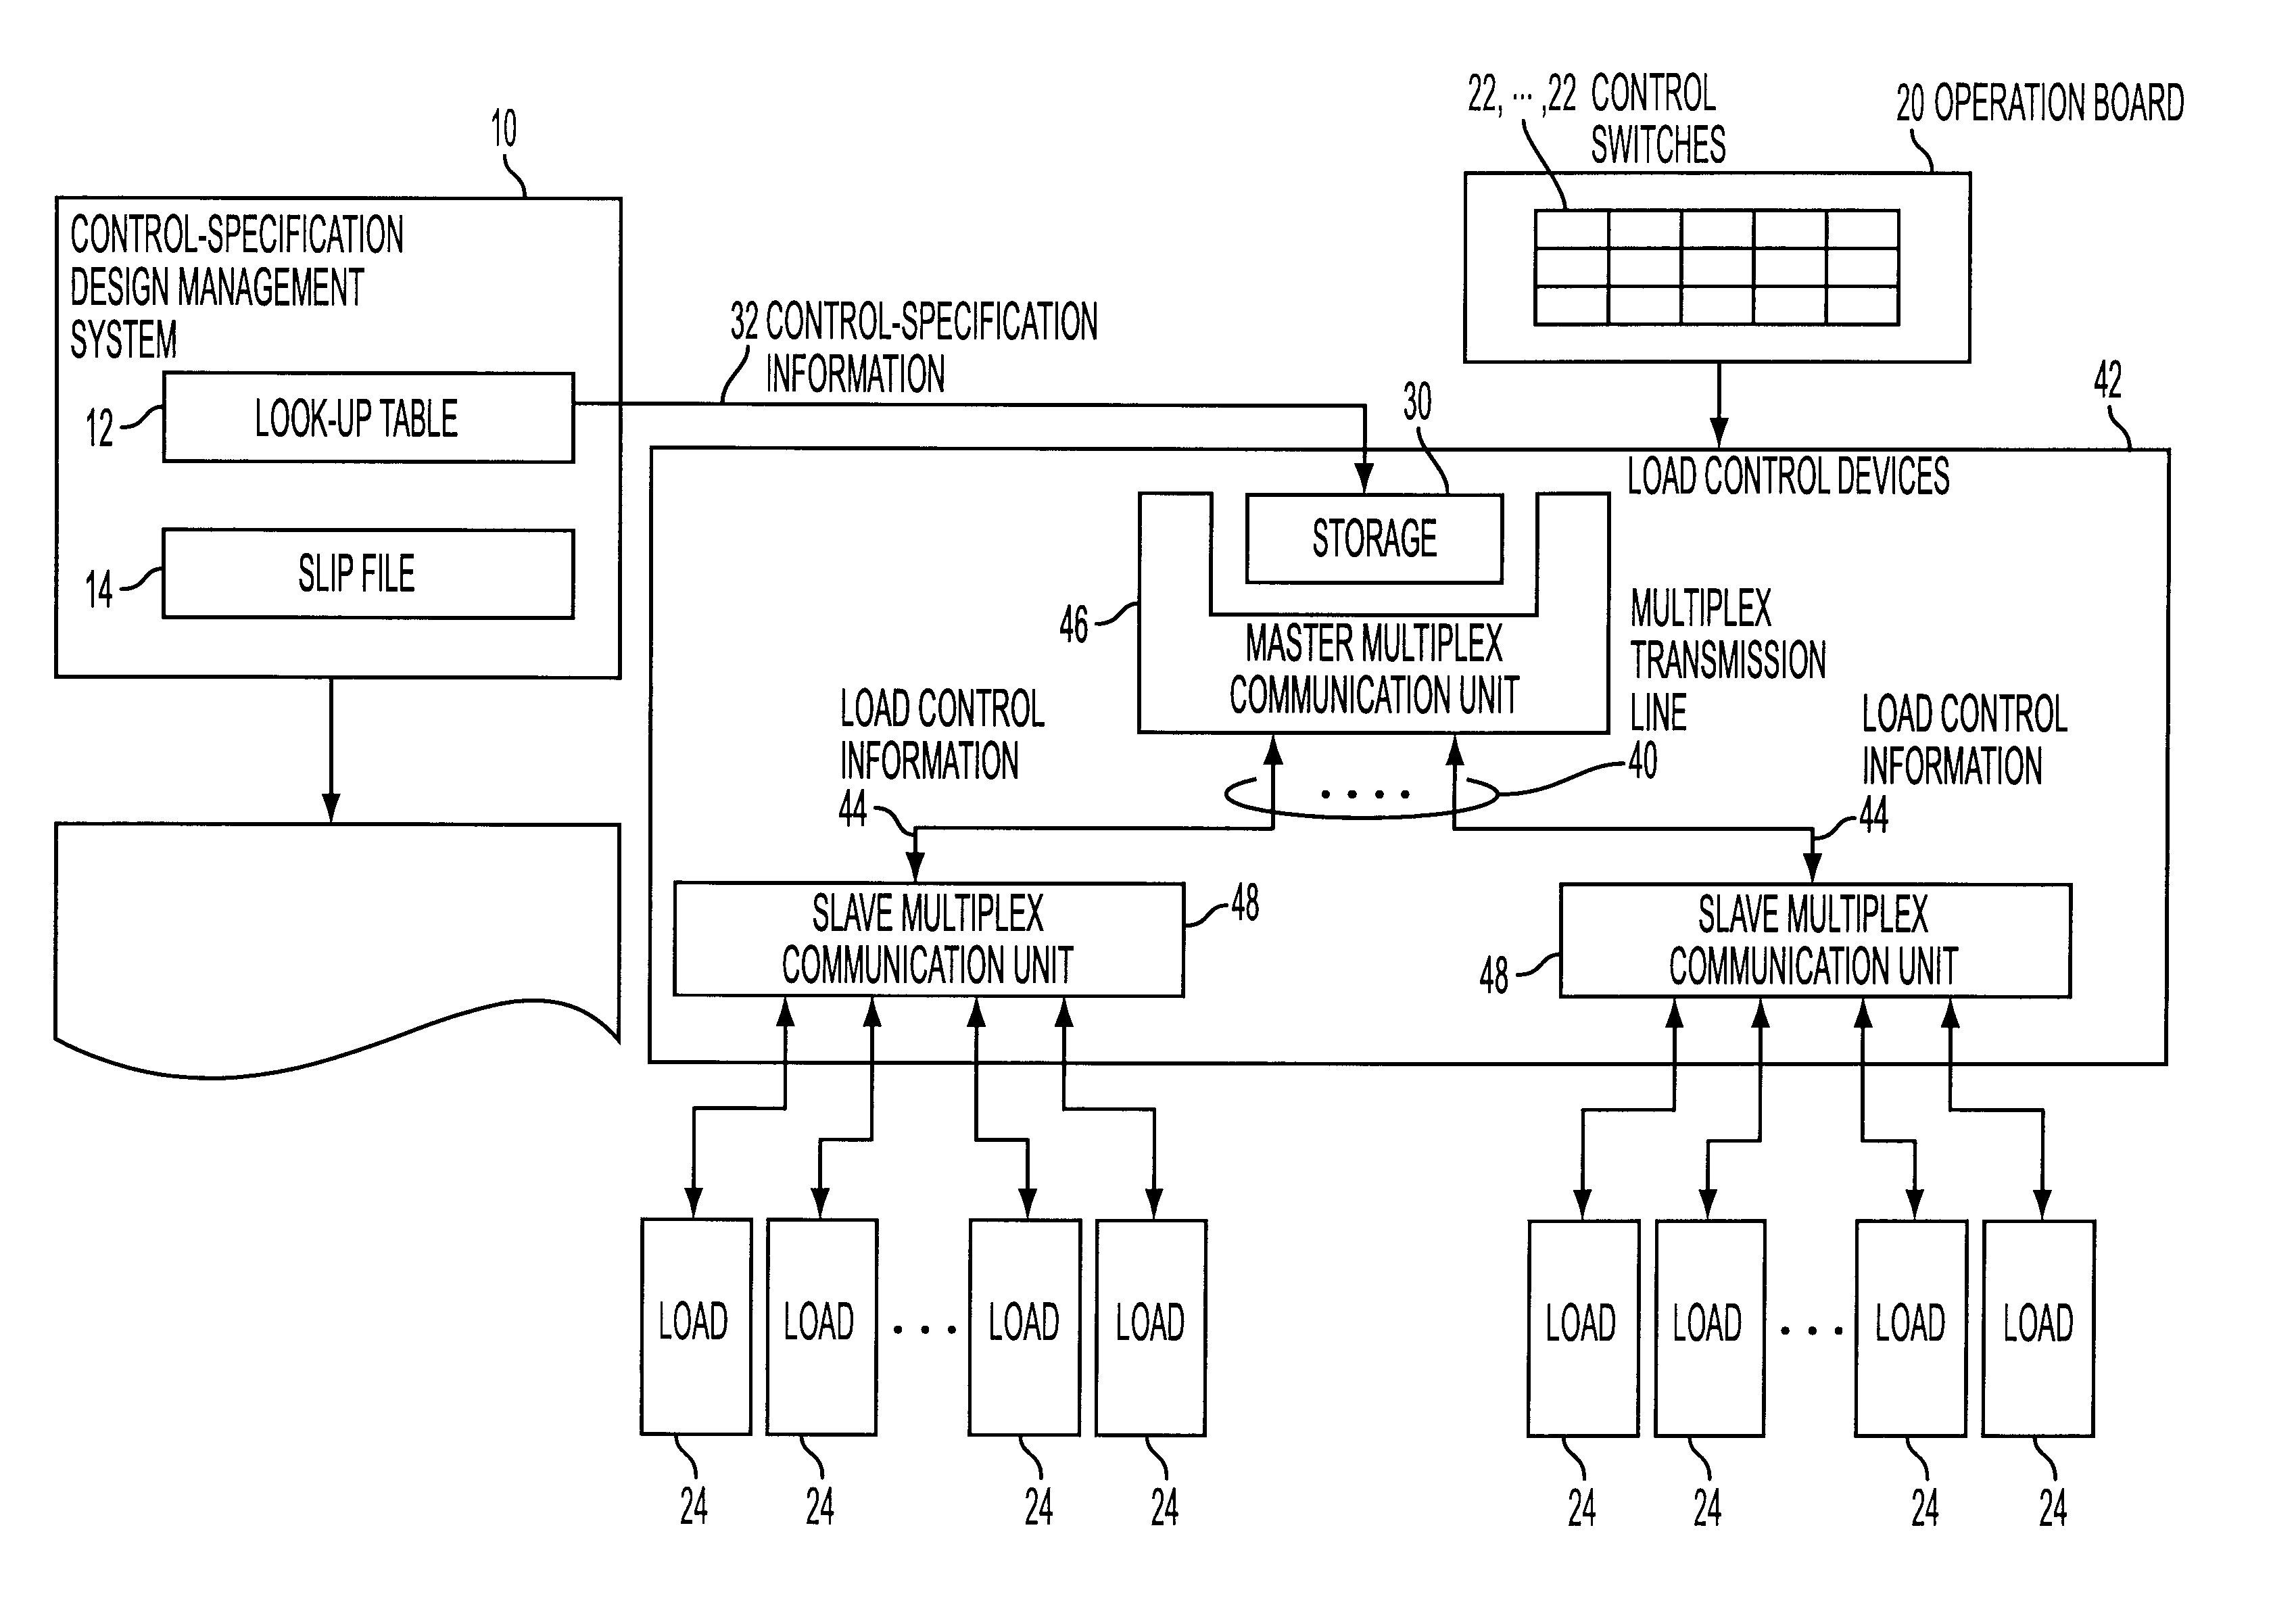 Control-specification design management system used for load control devices